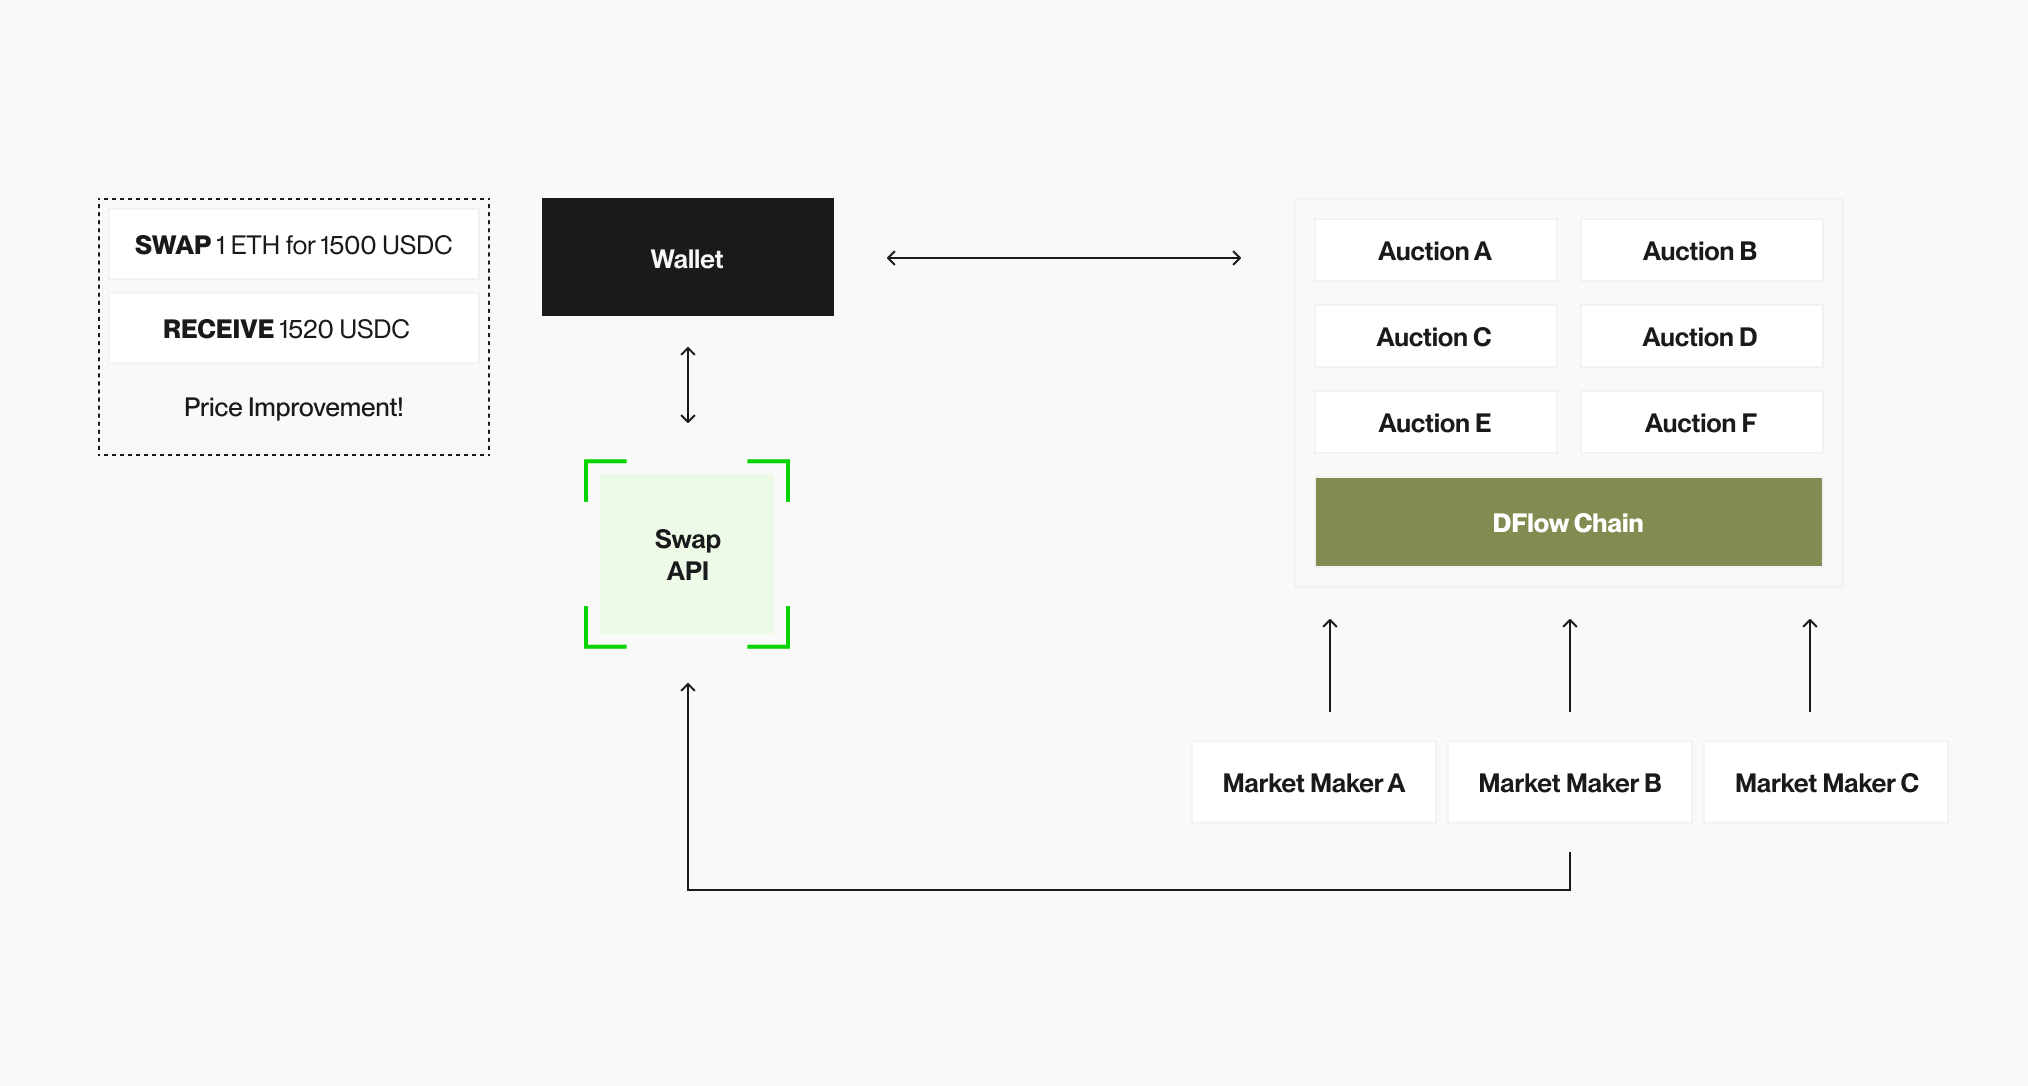 A wallet uses DFlow's Swap API to route orders to market makers via order flow auctions on DFlow Chain.